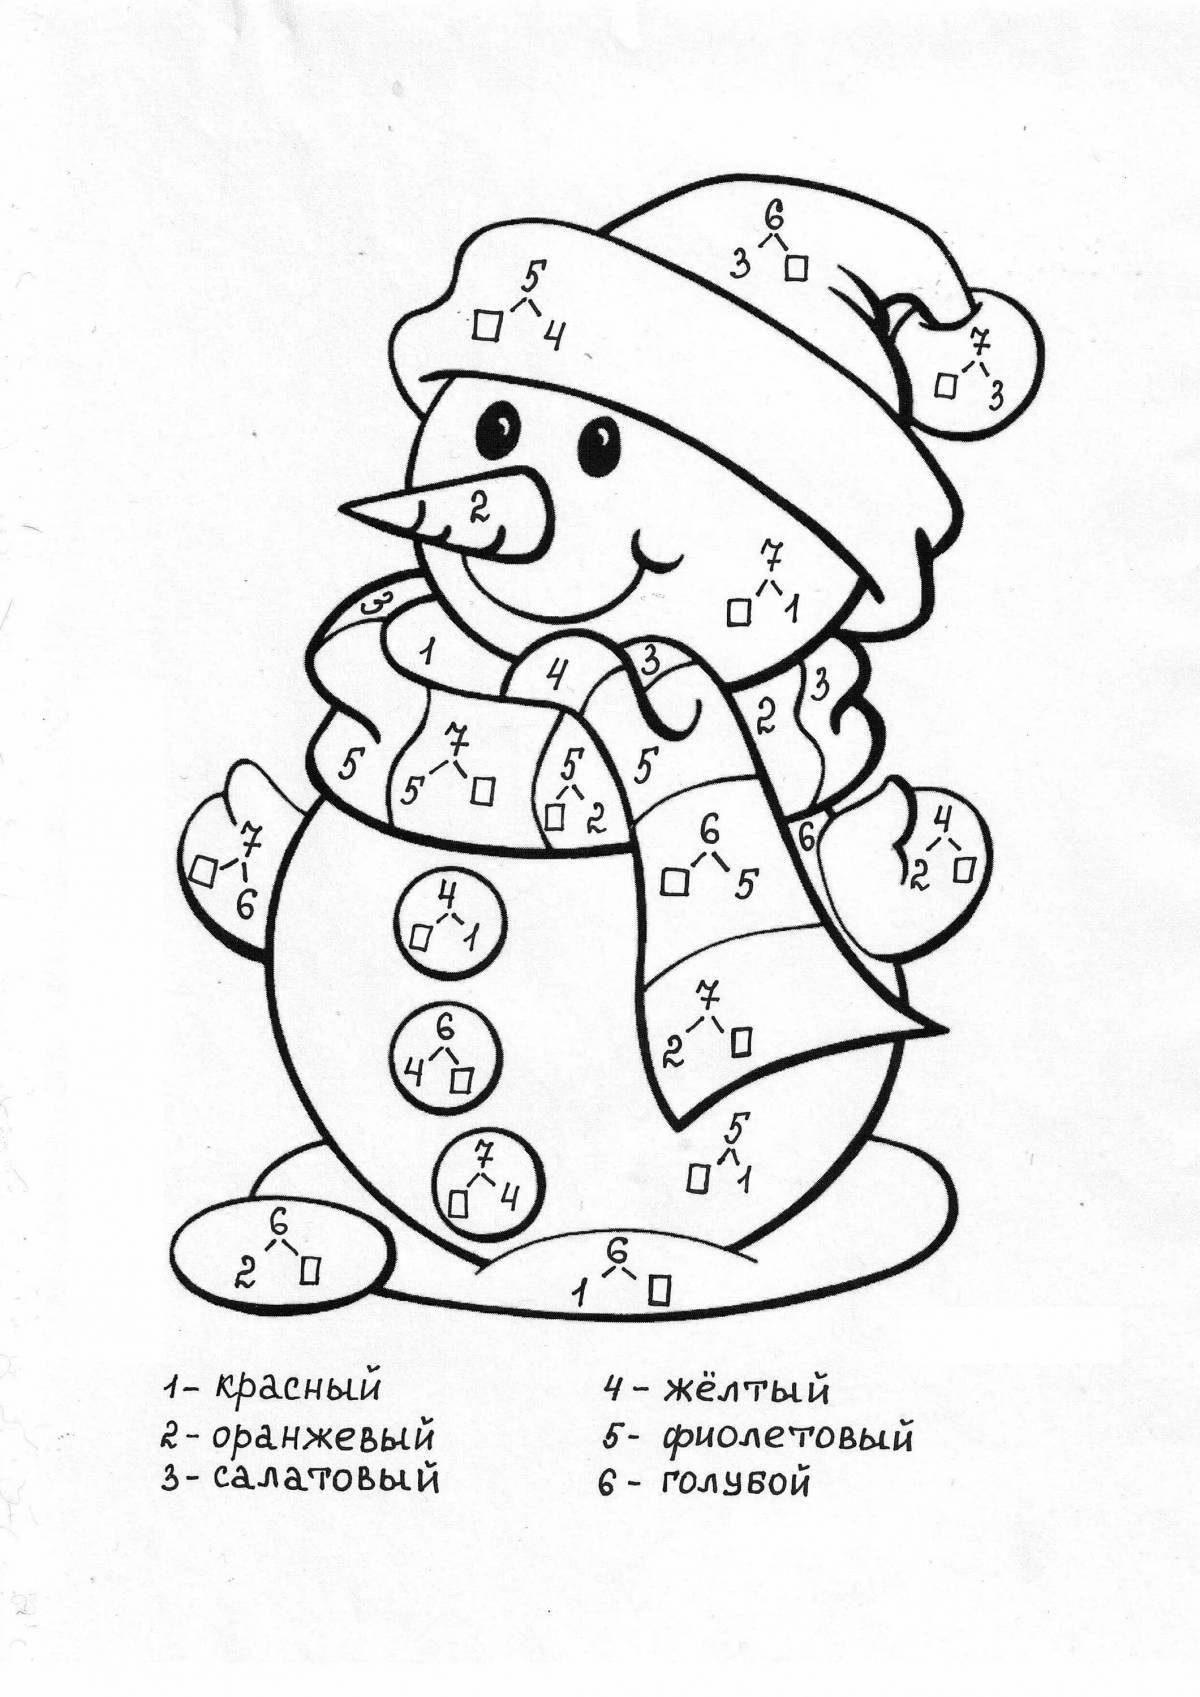 Charming math coloring up to 10